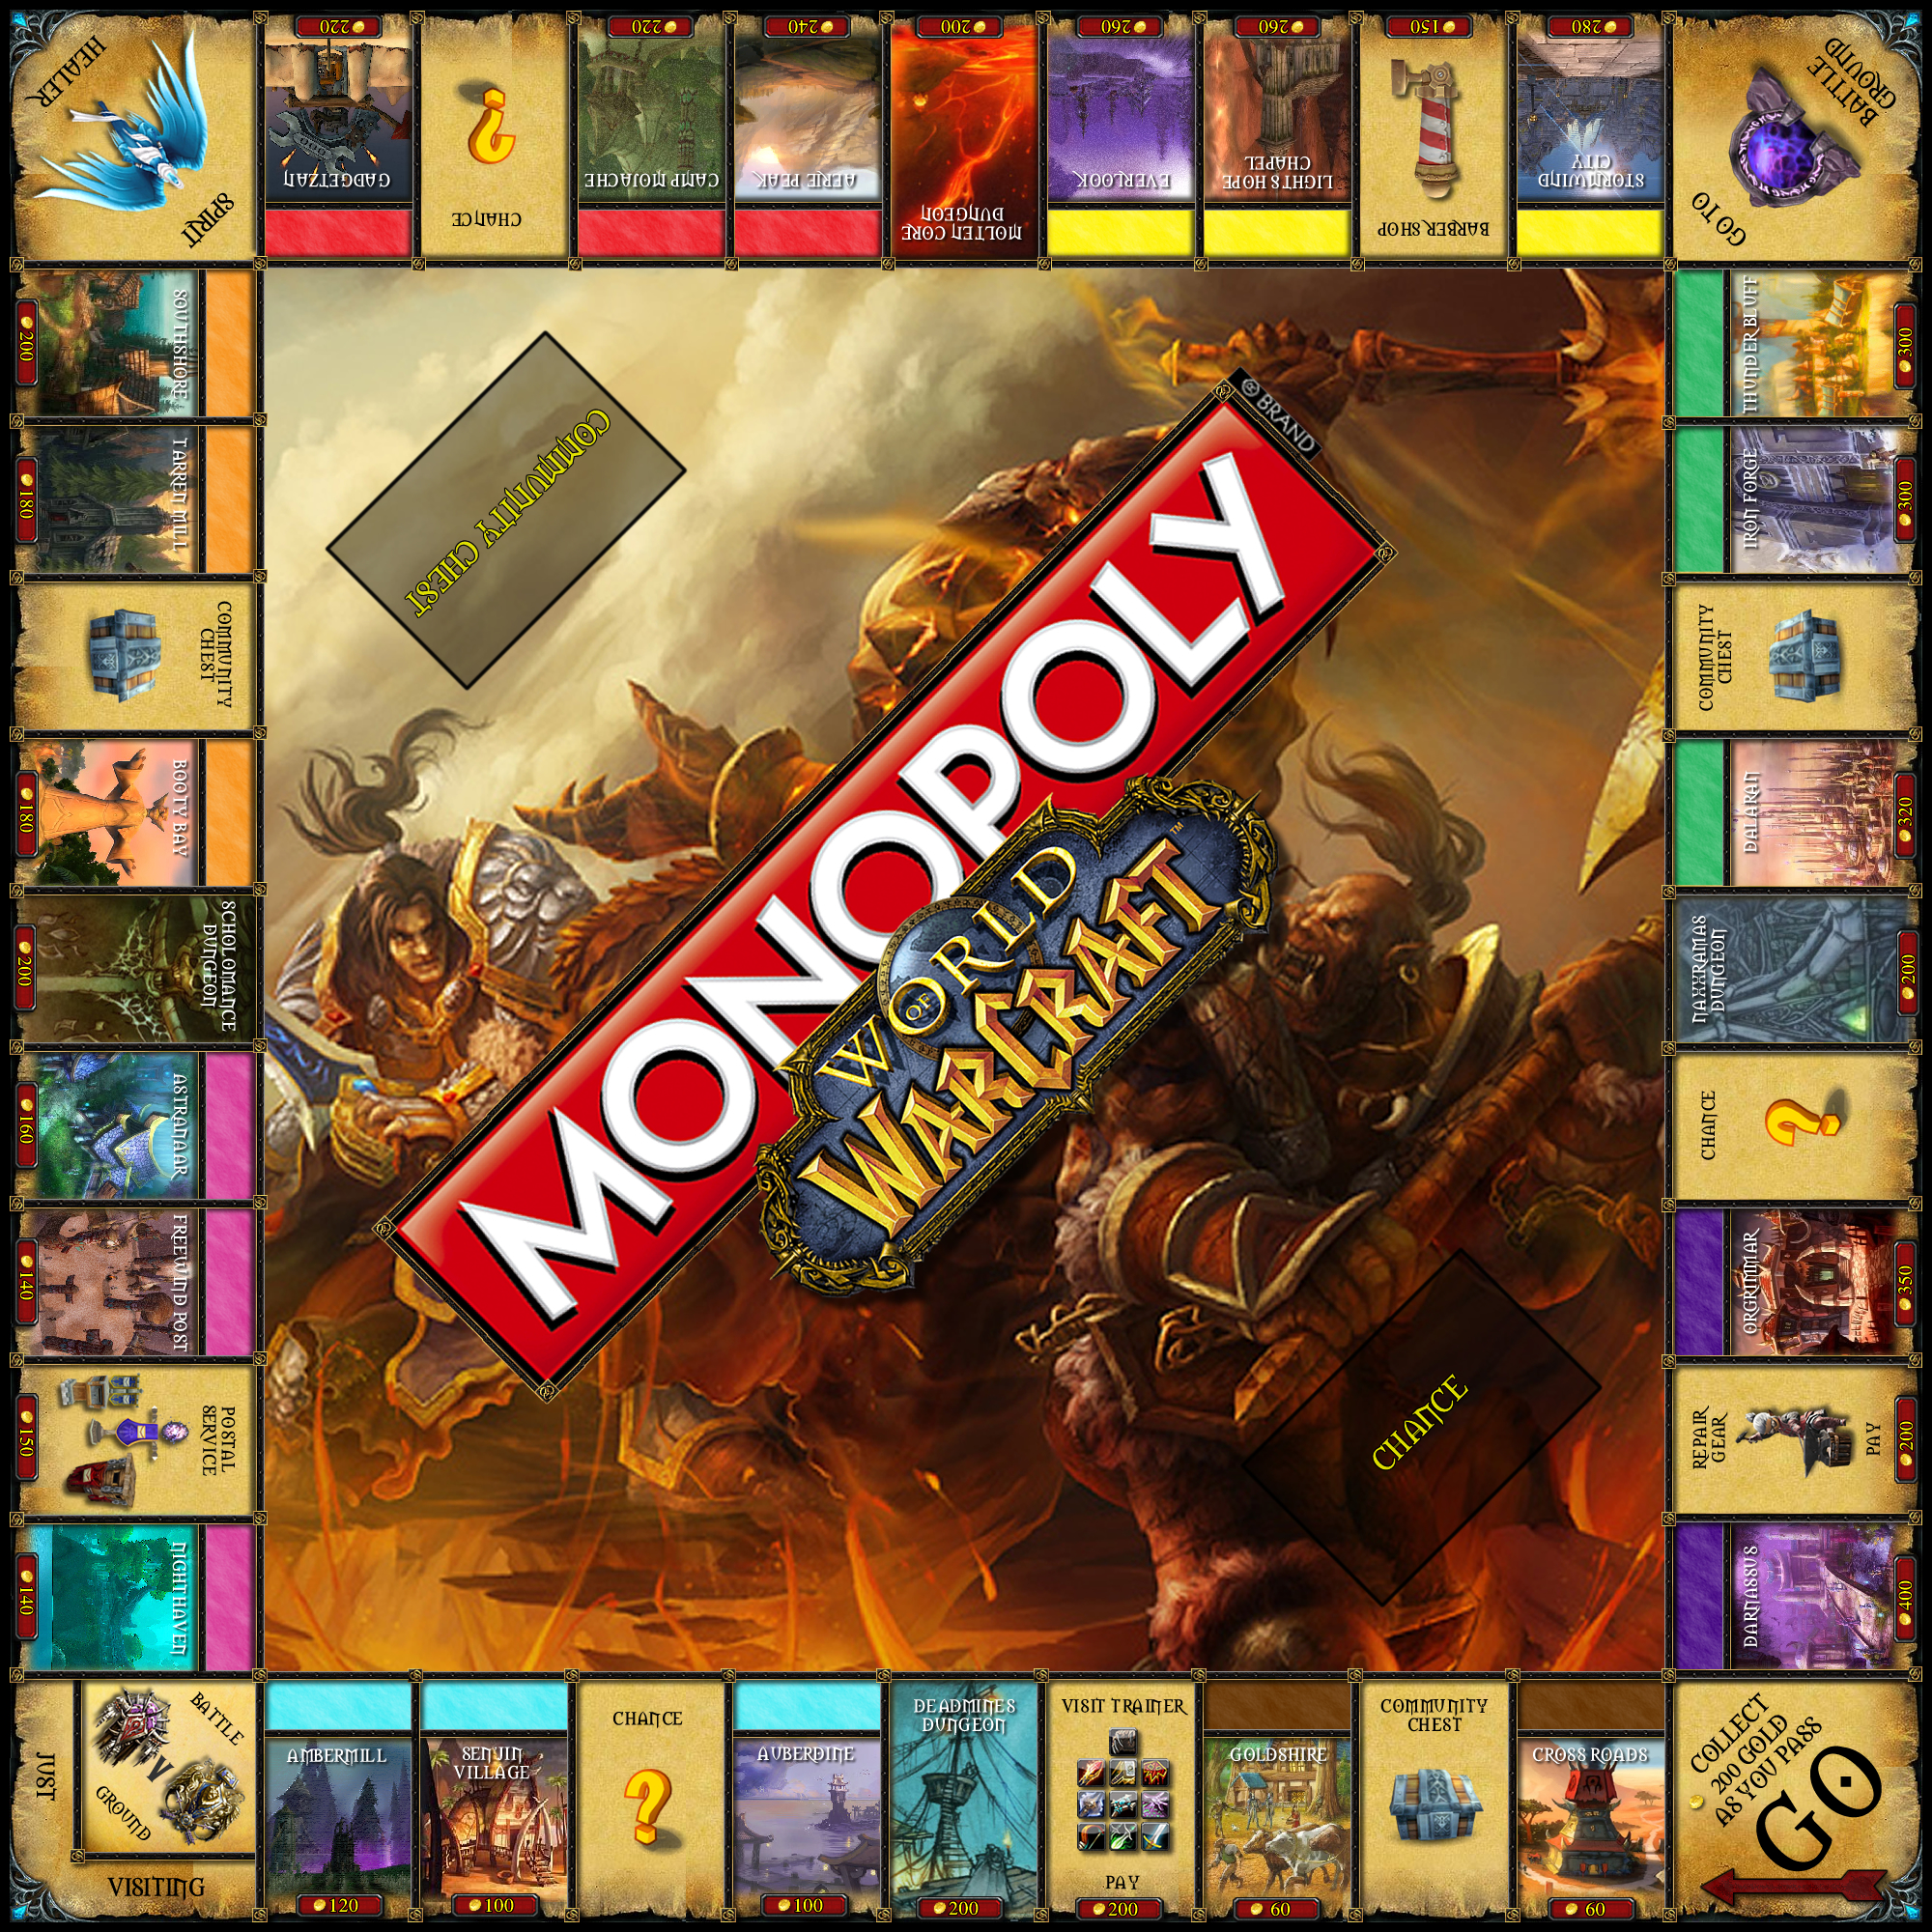 World Of Warcraft Monopoly Board Game